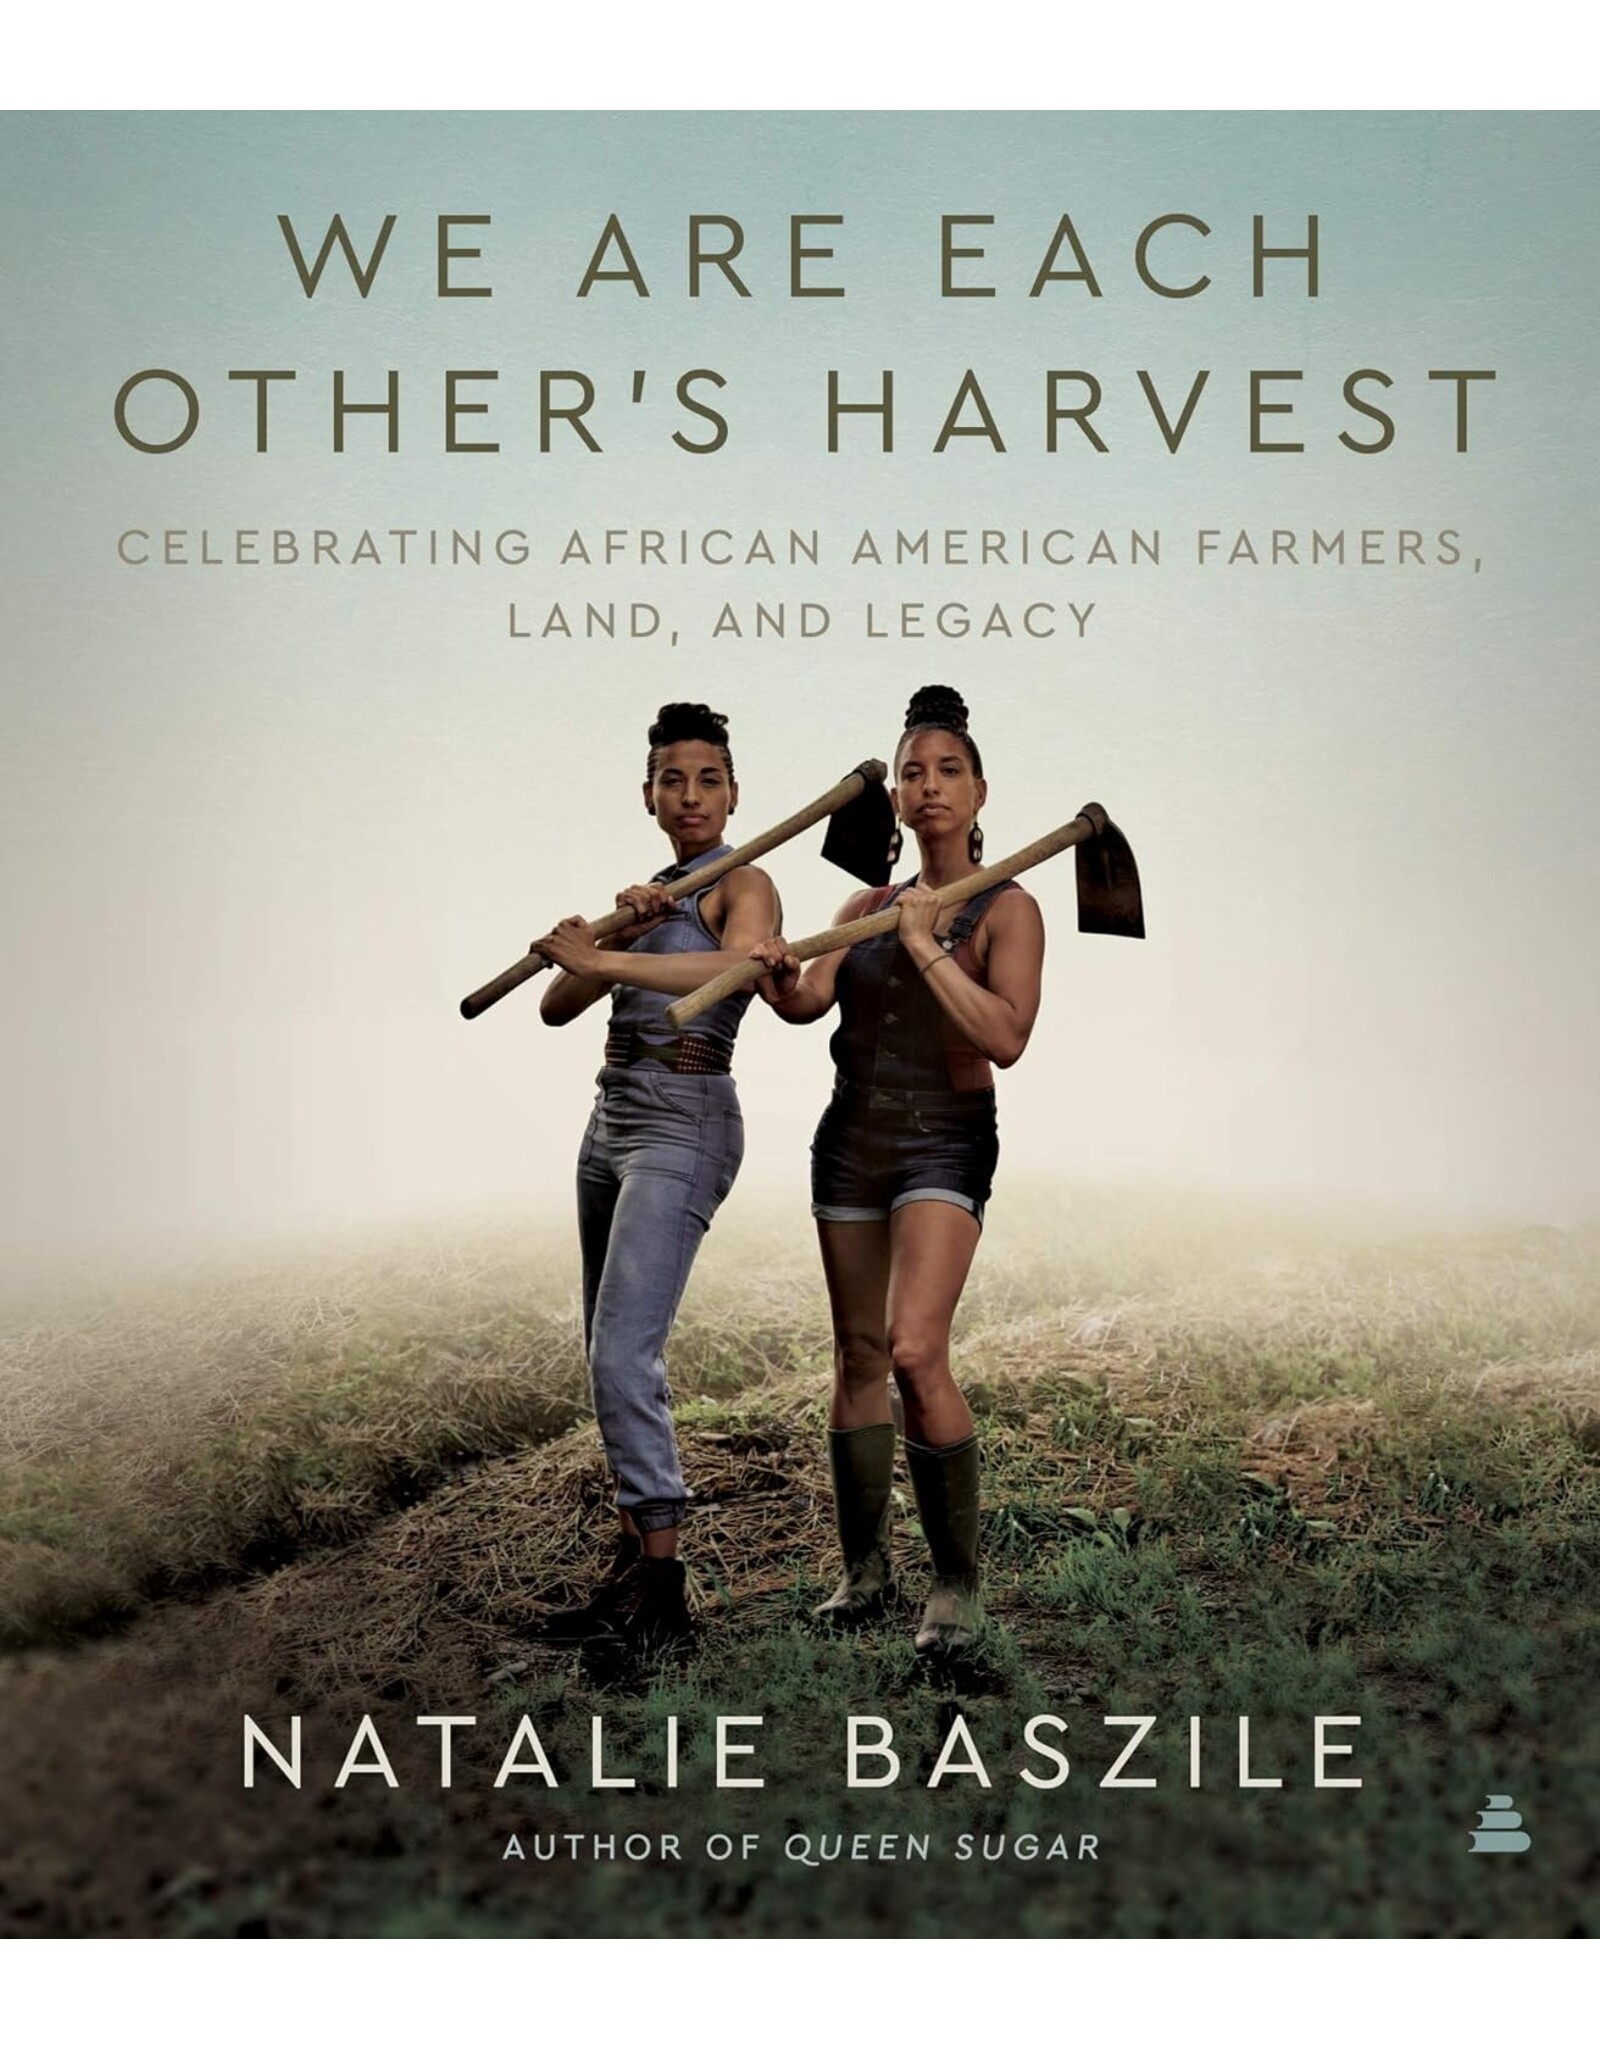 Non-Fiction: Post-1965 We Are Each Other's Harvest: Celebrating African American Farmers, Land, and Legacy